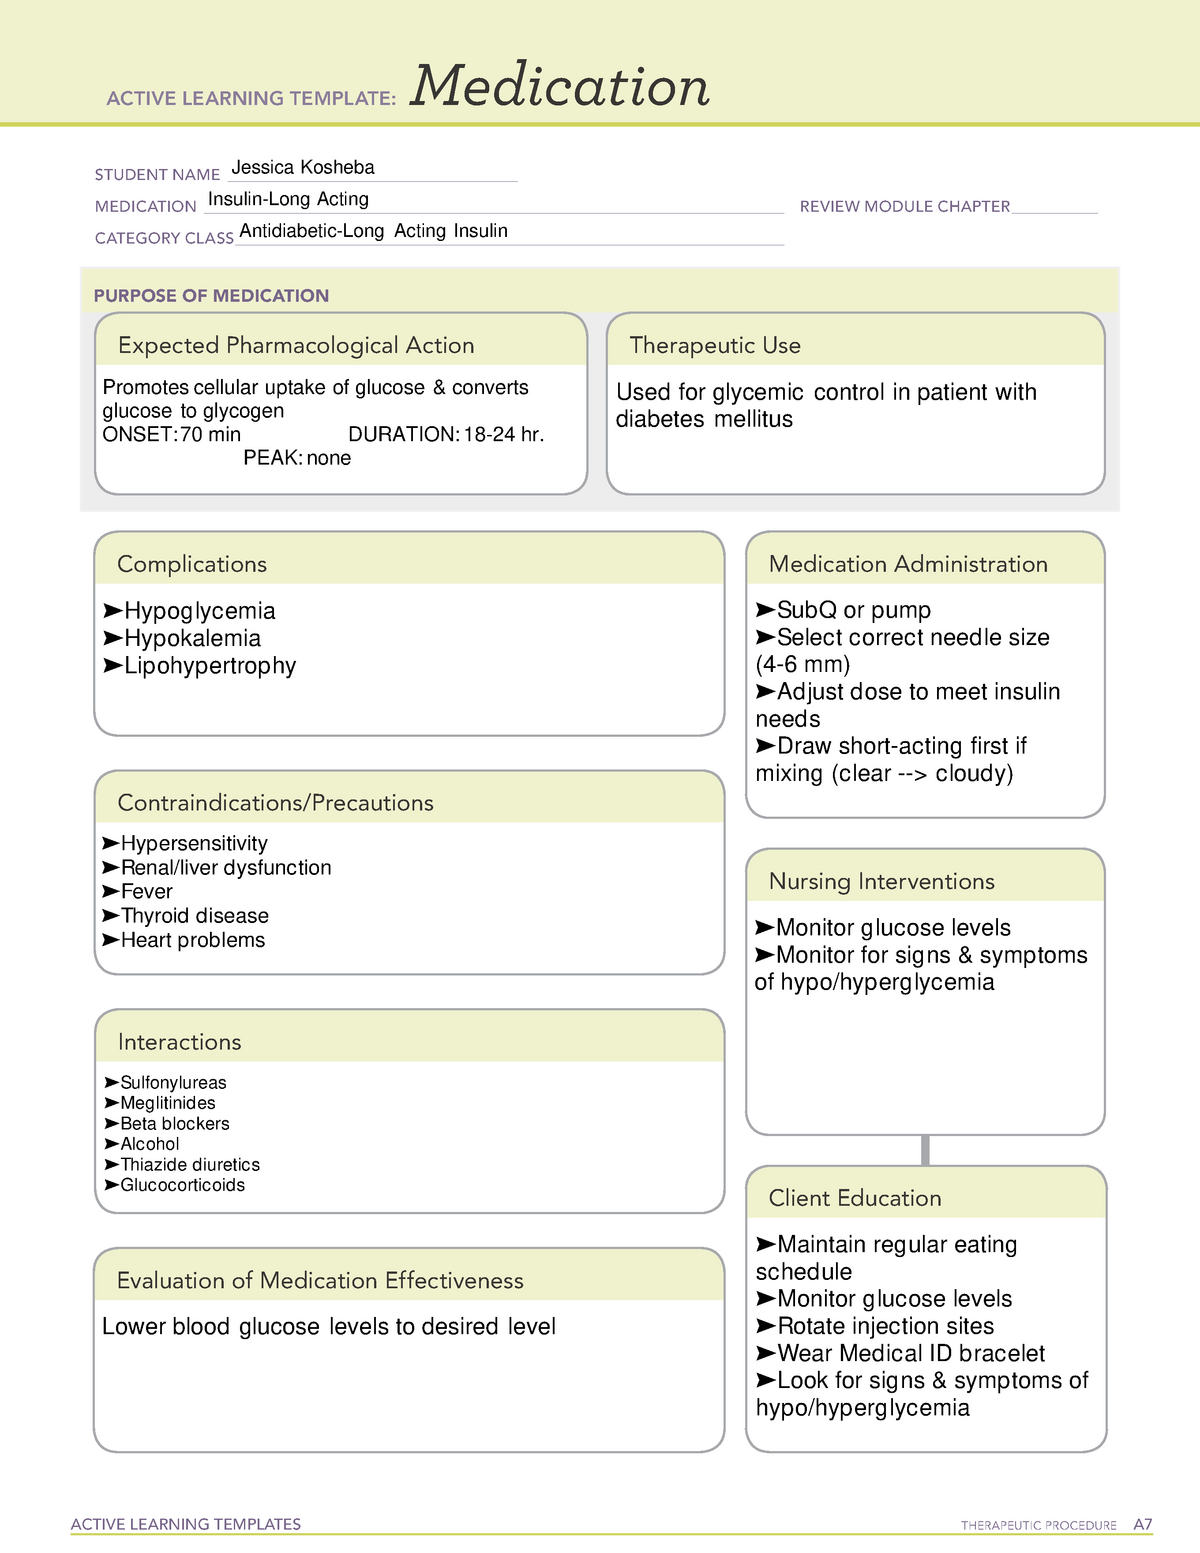 ATI Medication on Long Acting Insulin - ACTIVE LEARNING TEMPLATES ...